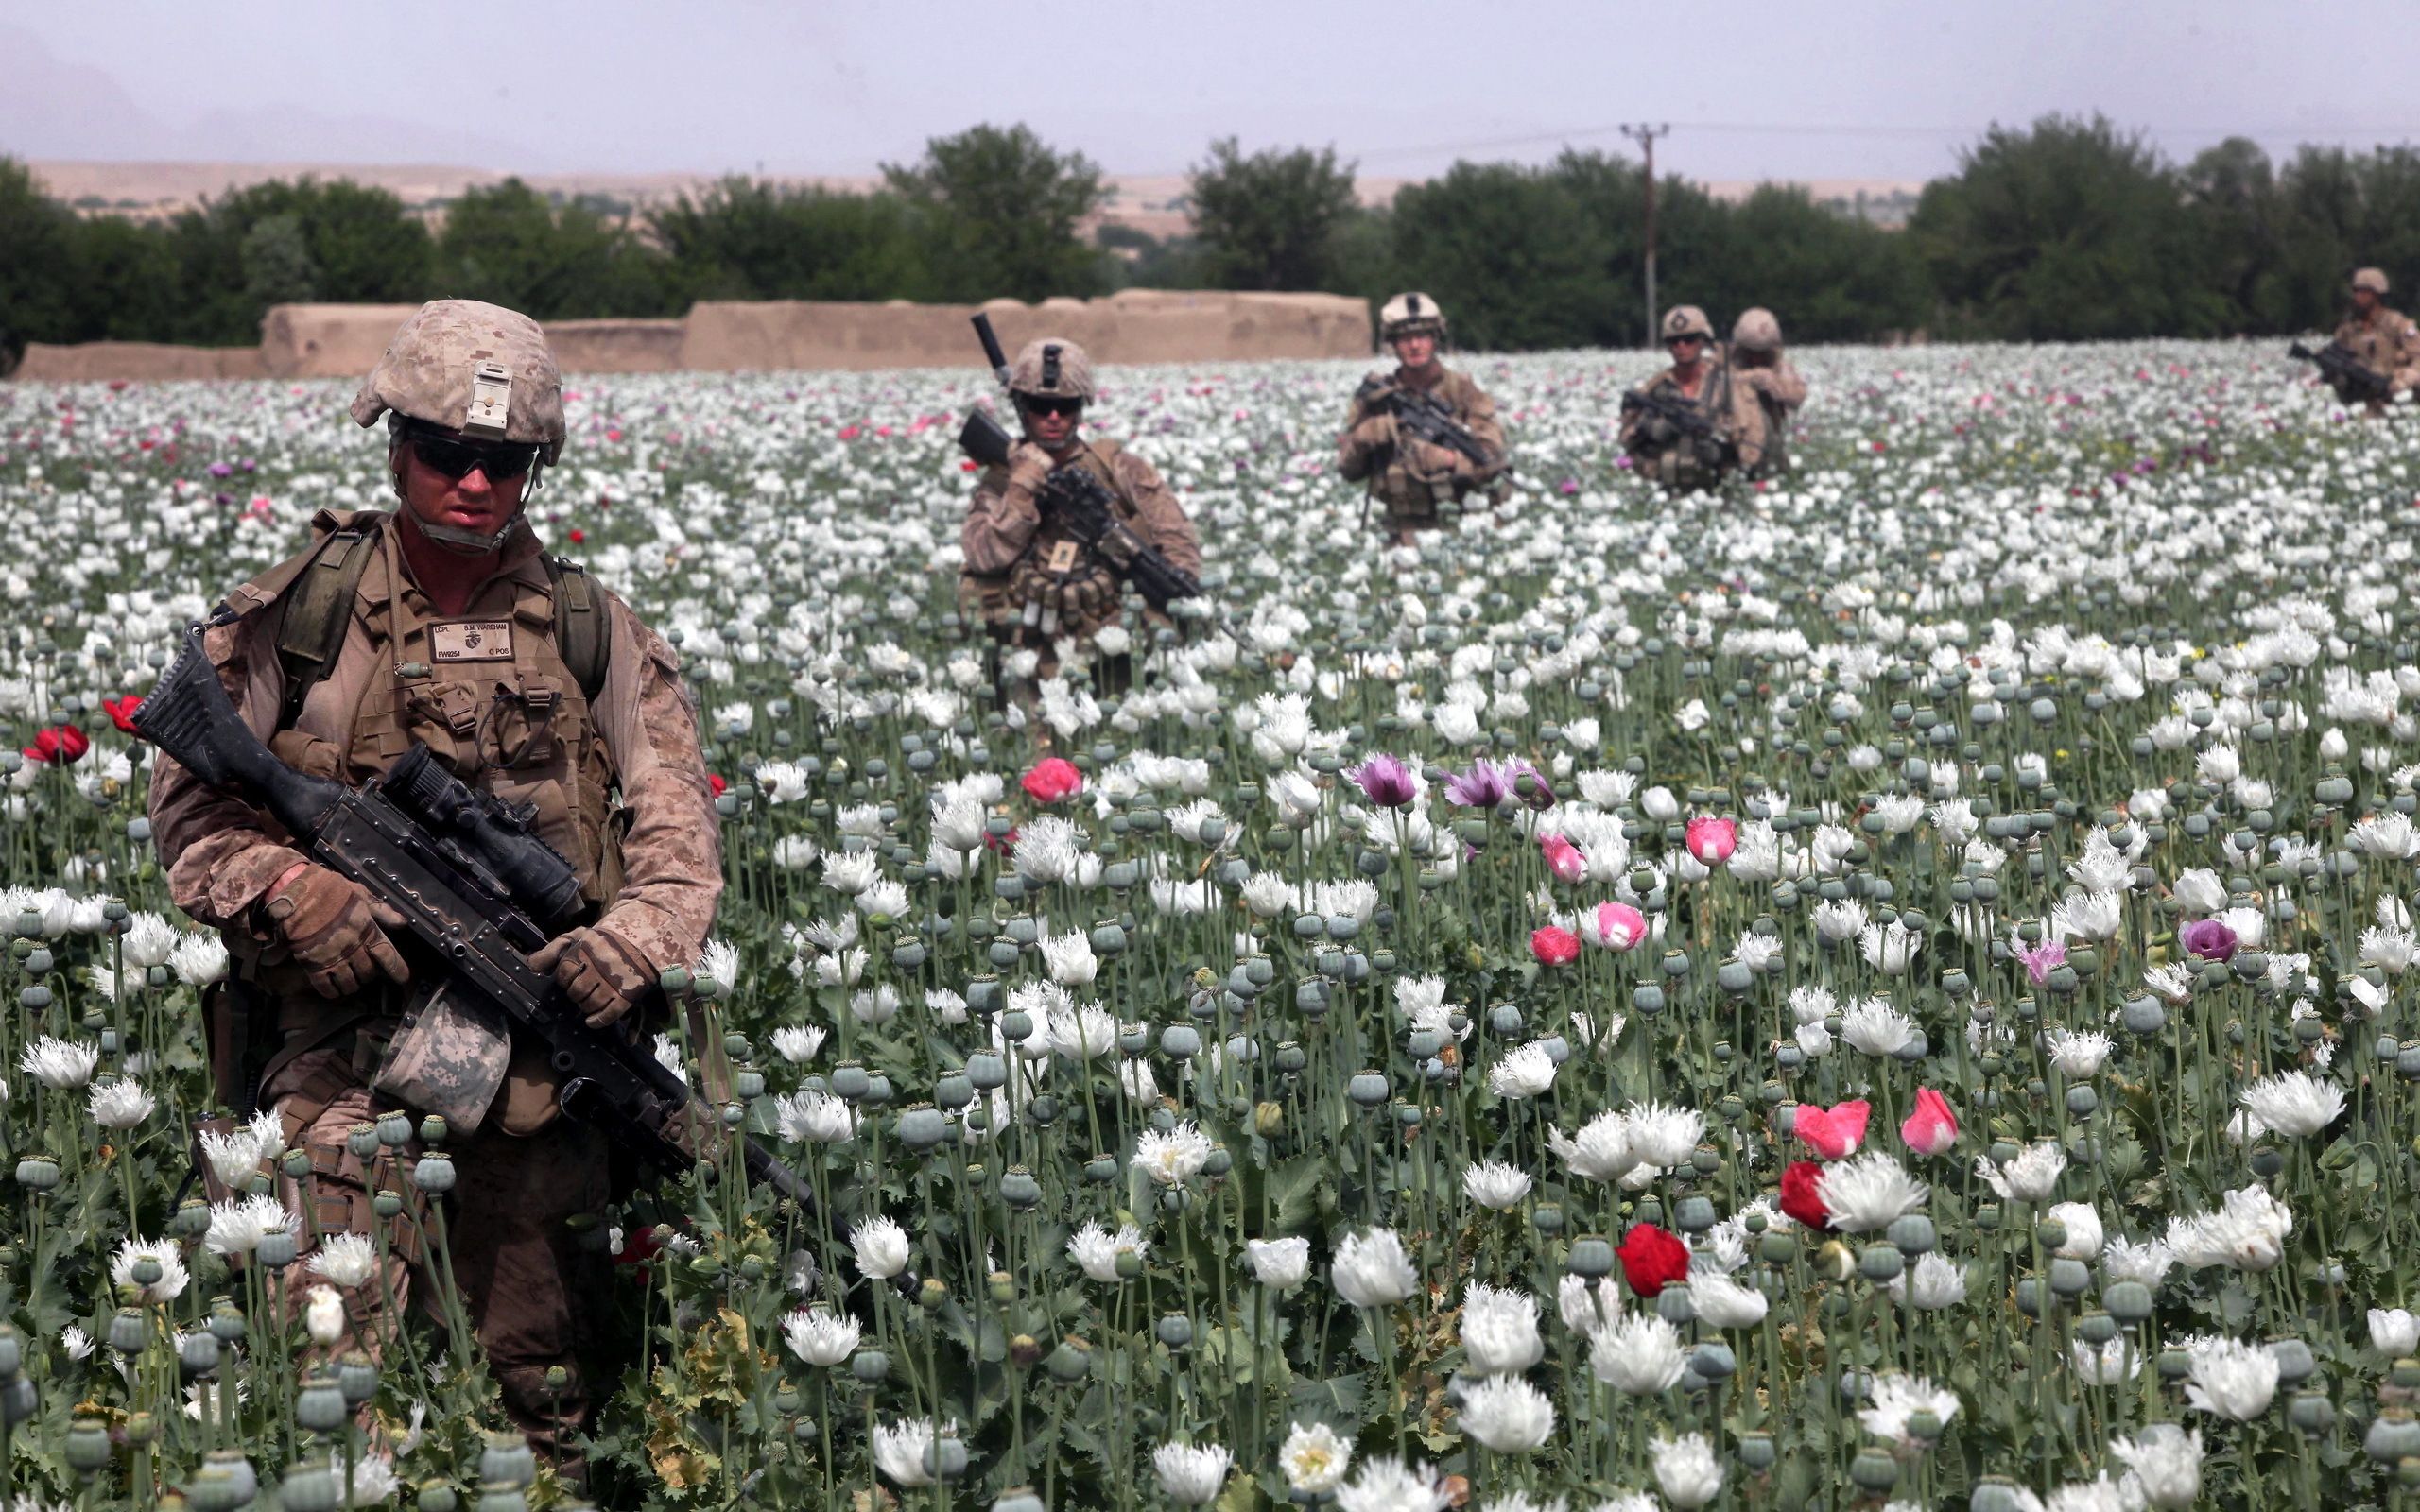 Soldiers in a poppy field wallpapers and images - wallpapers ...